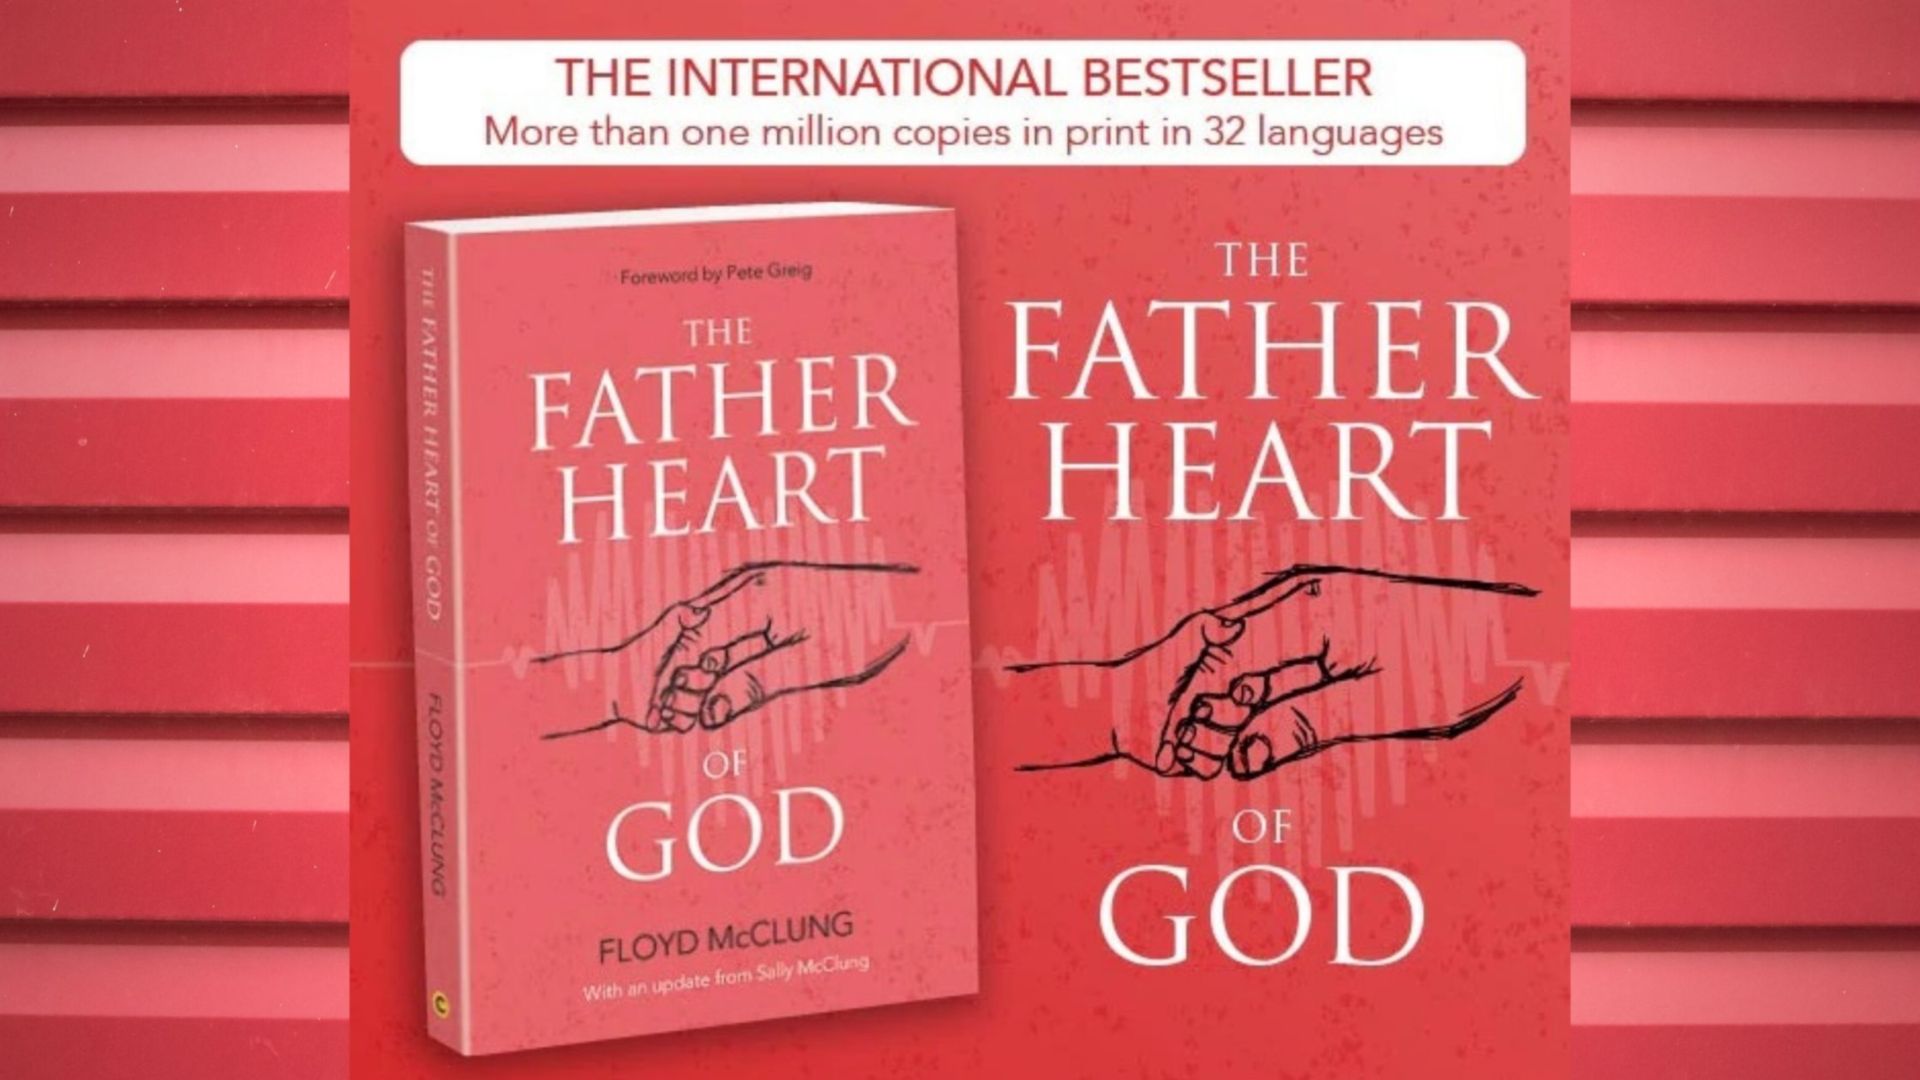 A new edition of 'The Father Heart of God' by Floyd McClung